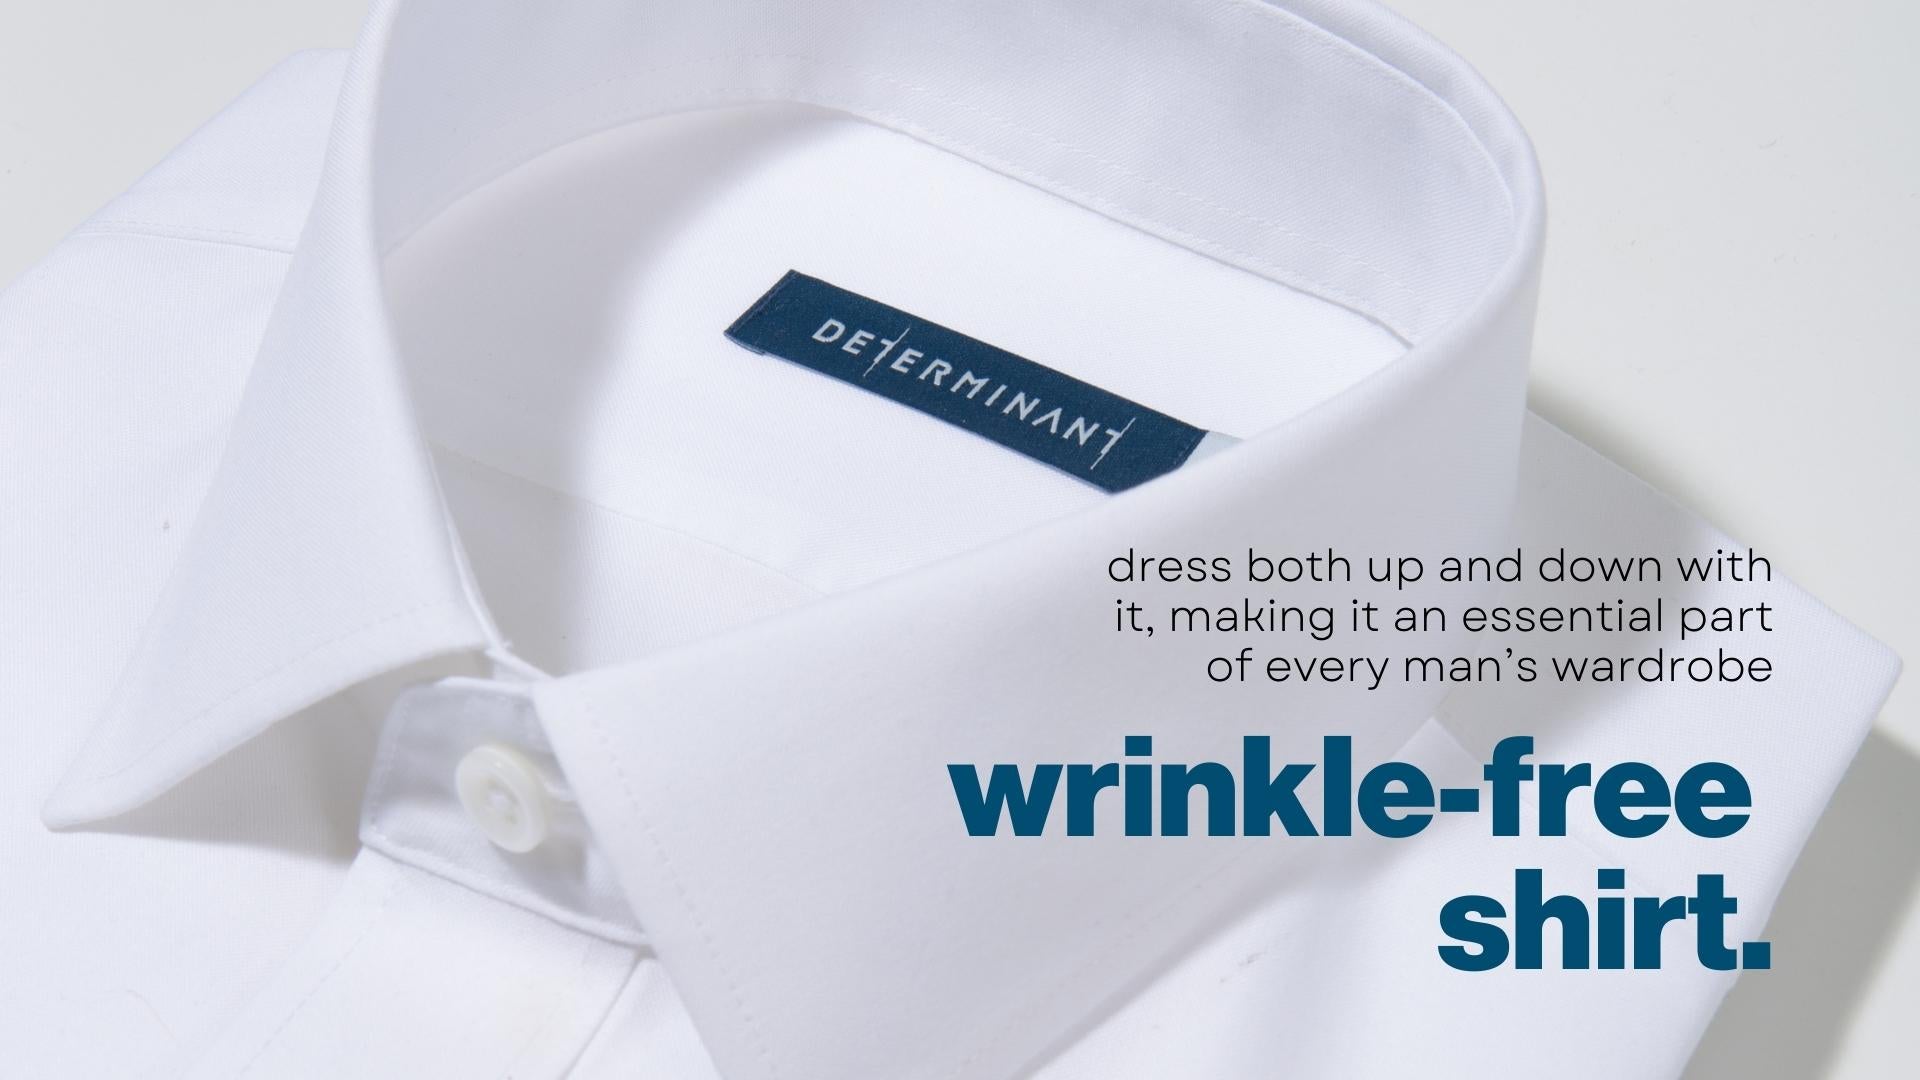 What is a wrinkle-free shirt? How does it work? – DETERMINANT